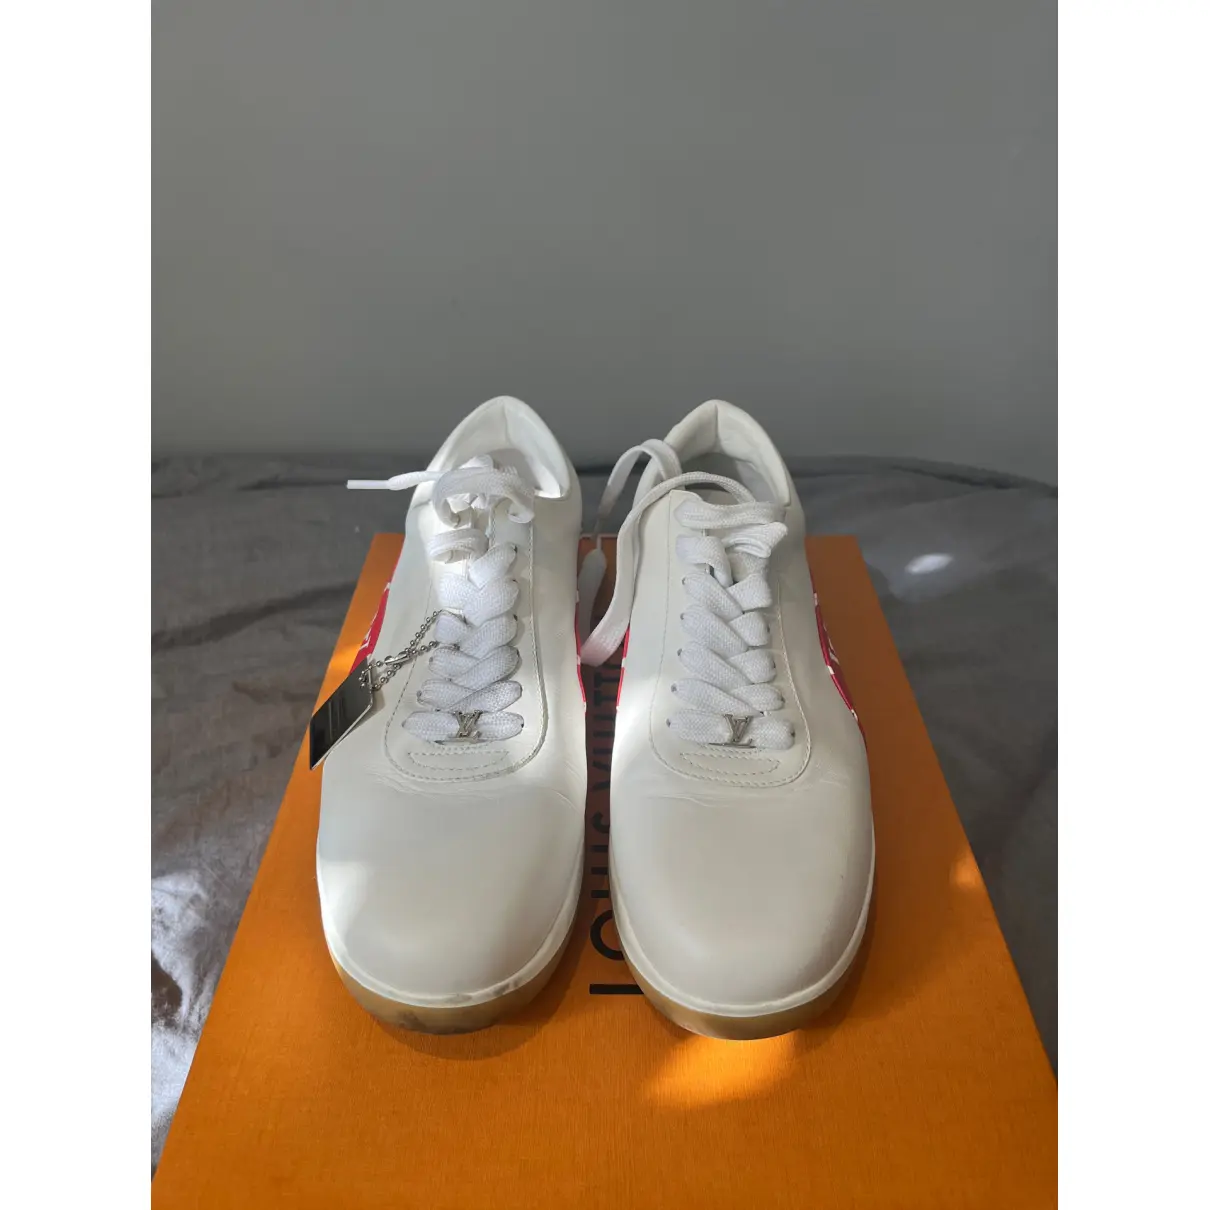 Buy Louis Vuitton x Supreme Leather trainers online